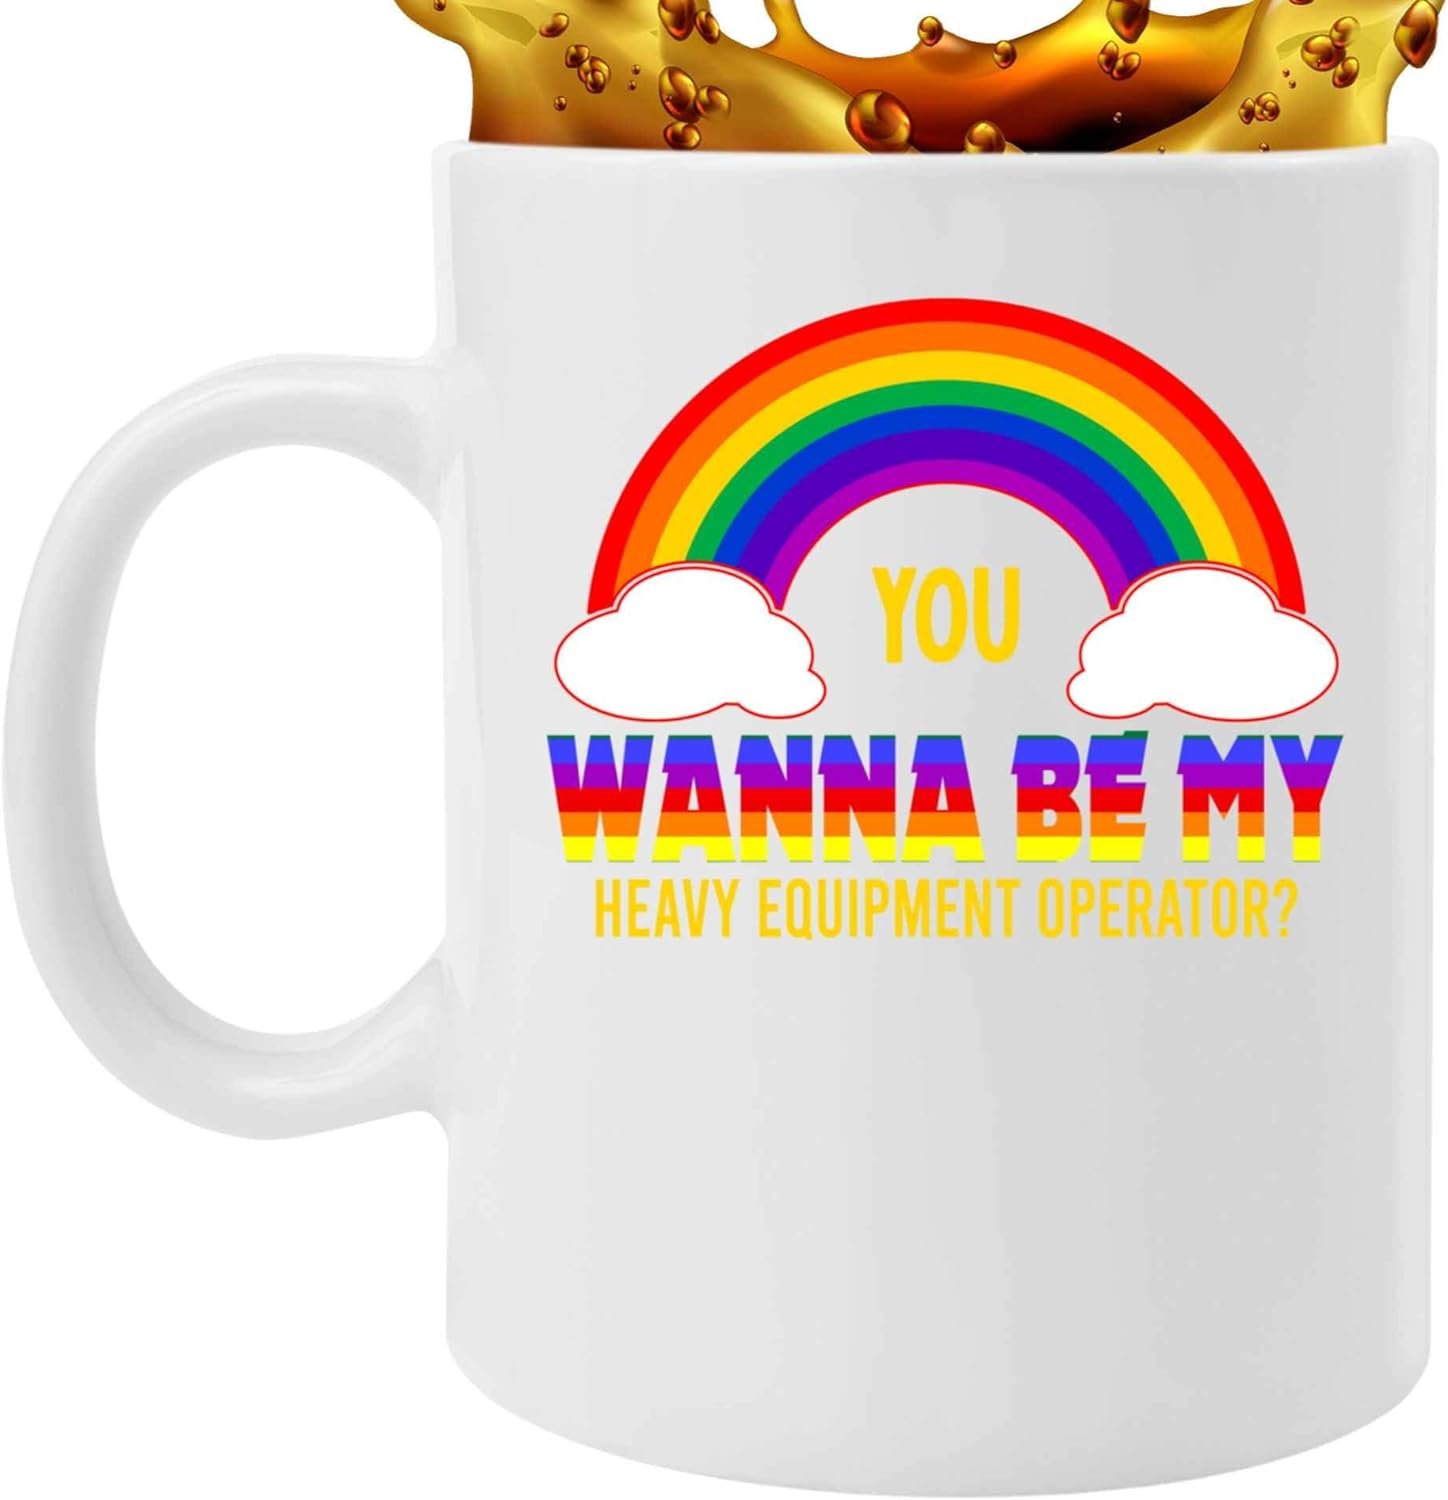 Funny Gift for Heavy Equipment Operator Review